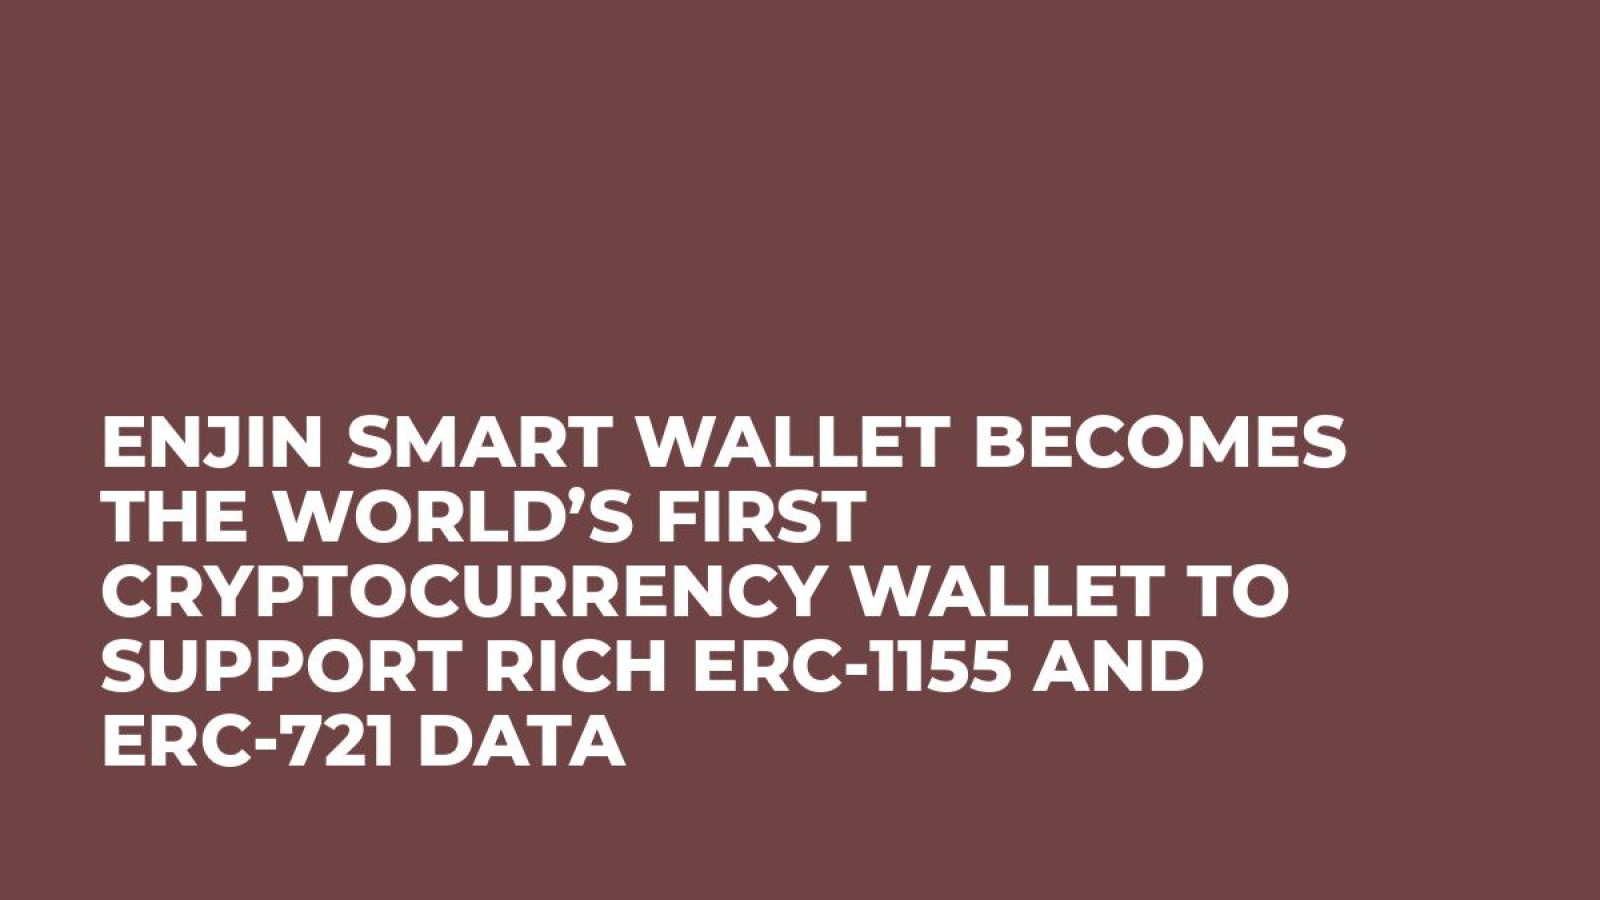 Enjin Smart Wallet becomes the world’s first cryptocurrency wallet to support rich ERC-1155 and ERC-721 data